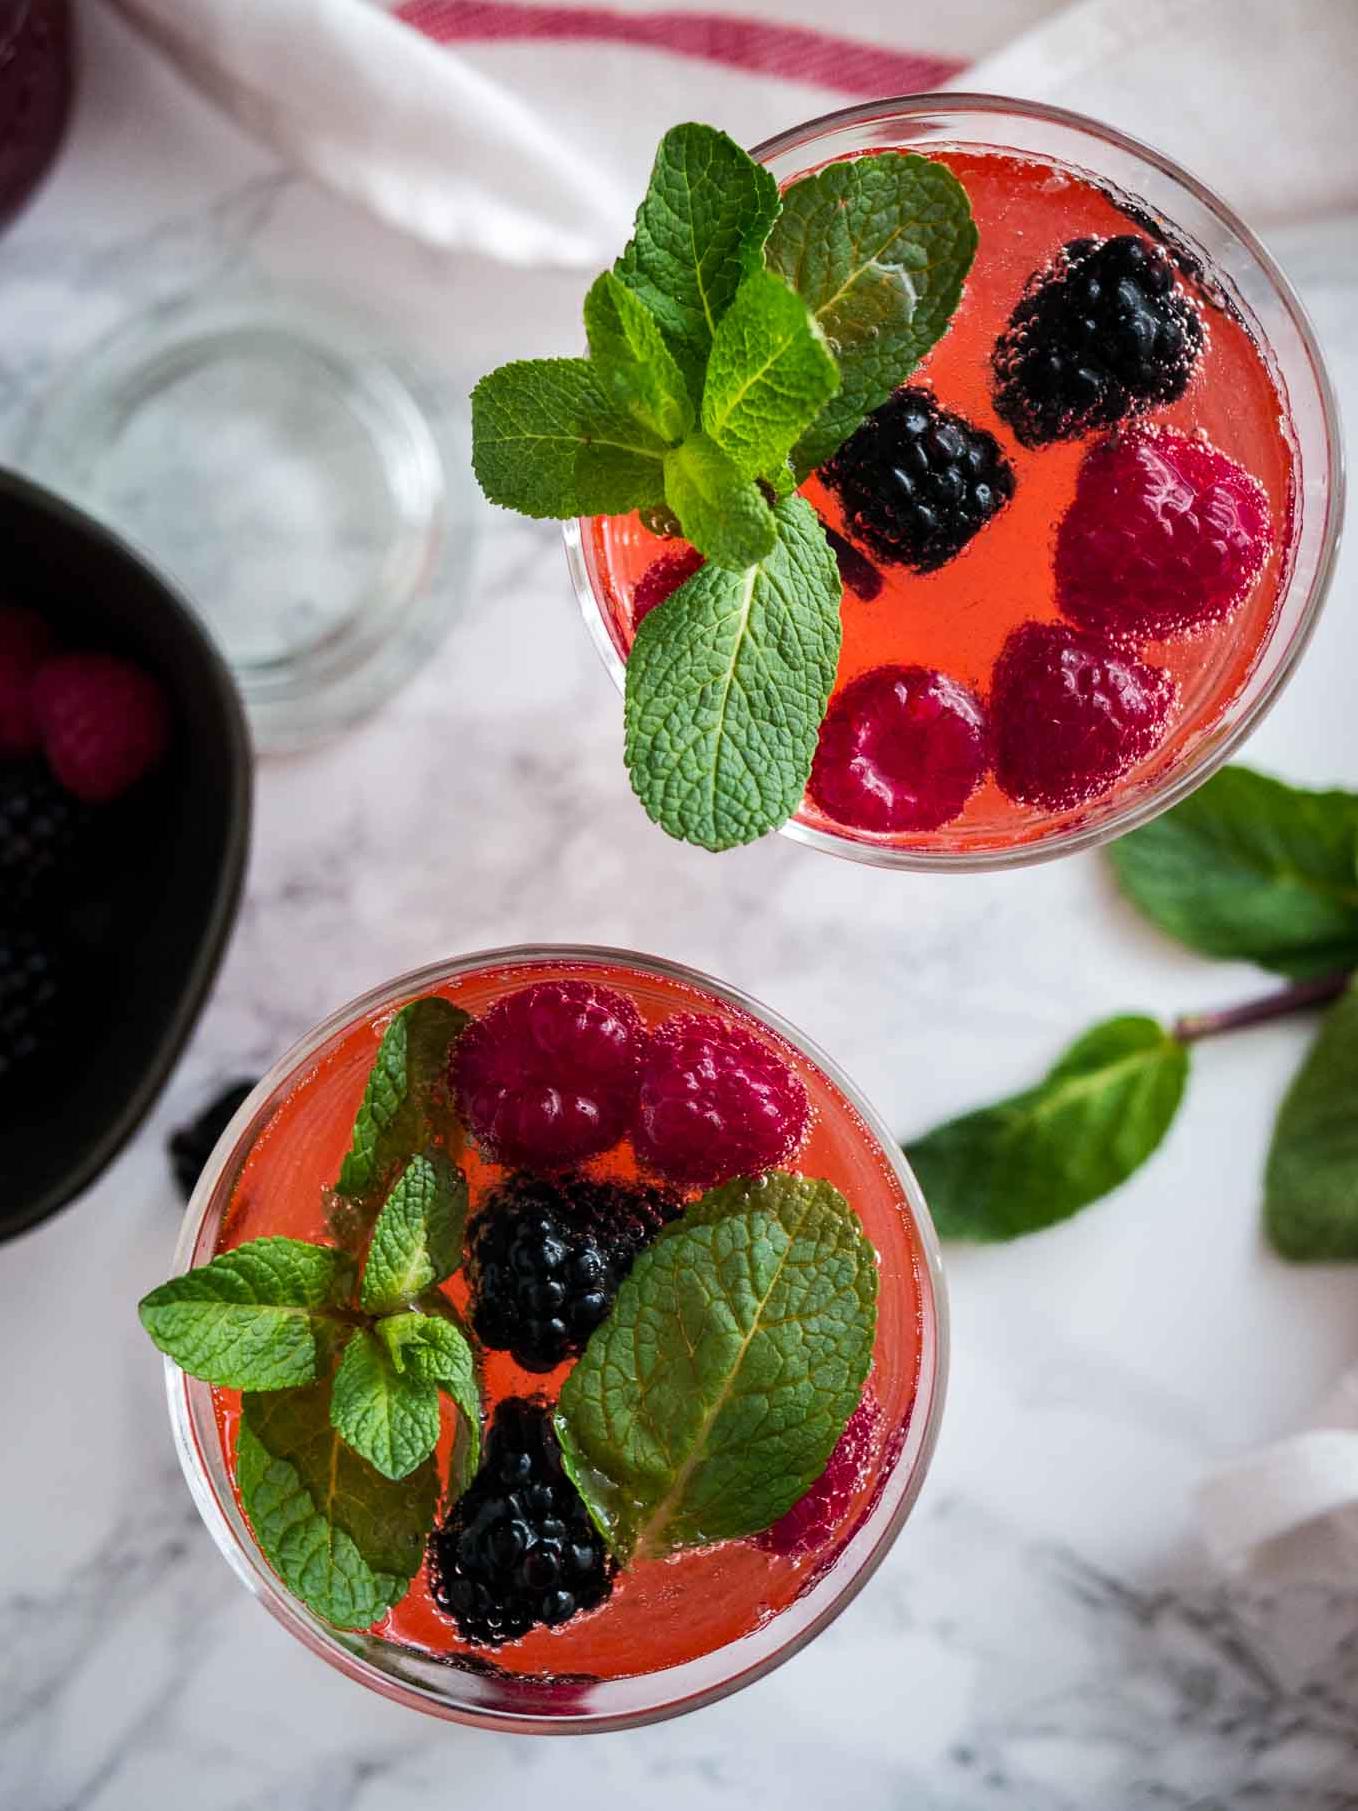  Raise your glasses and cheers to a bubbly, berry-ful drink!